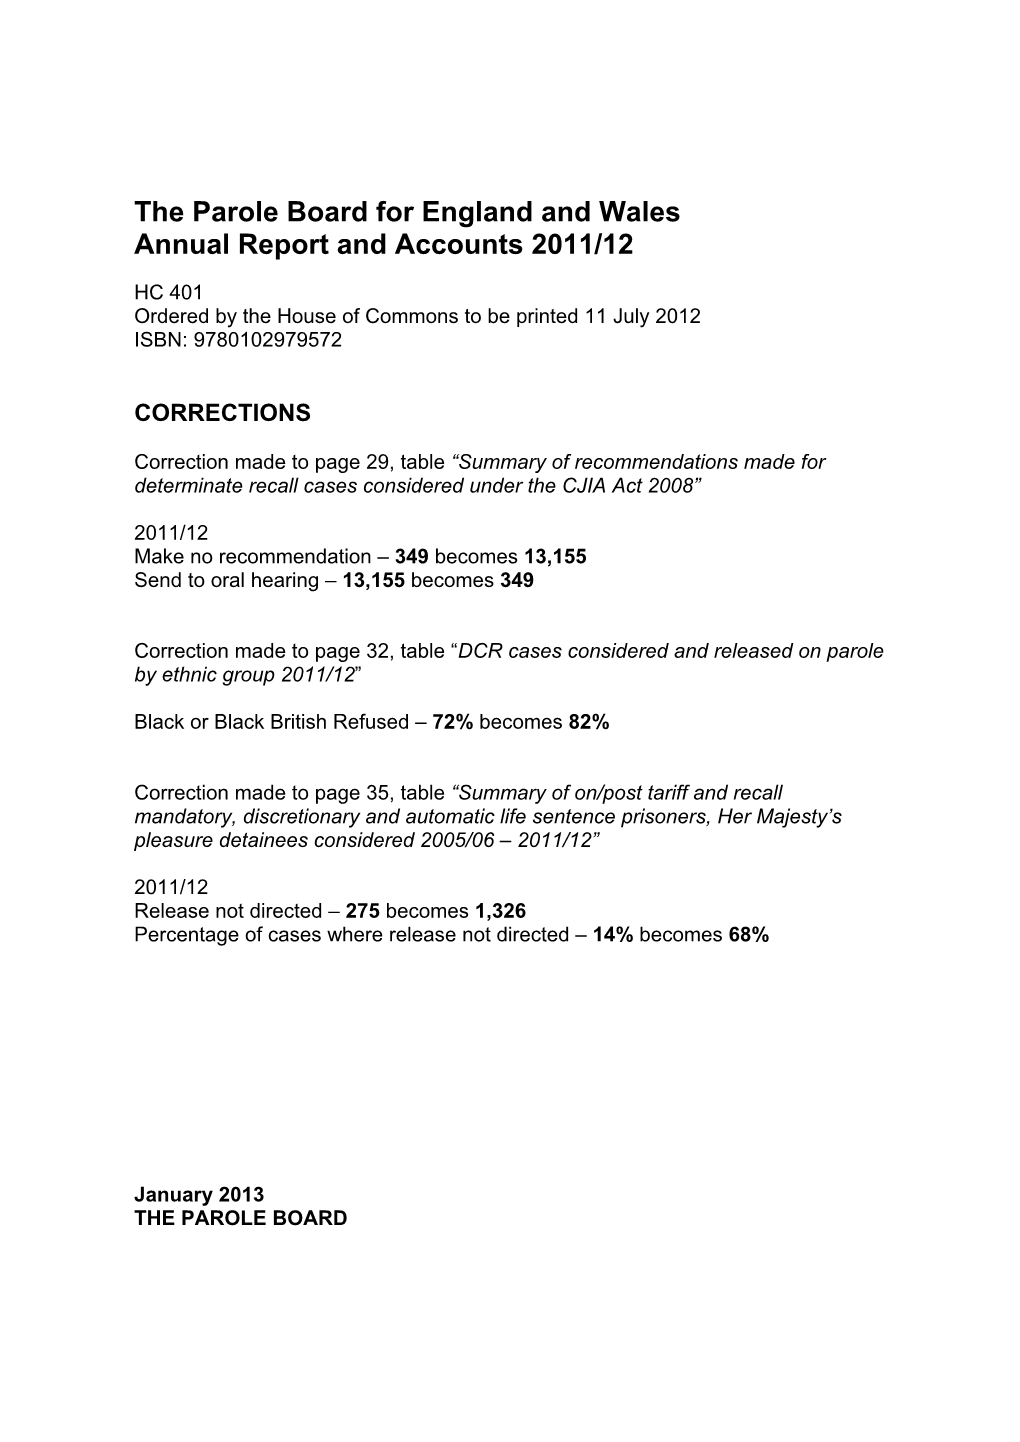 The Parole Board for England and Wales Annual Report and Accounts 2011/12